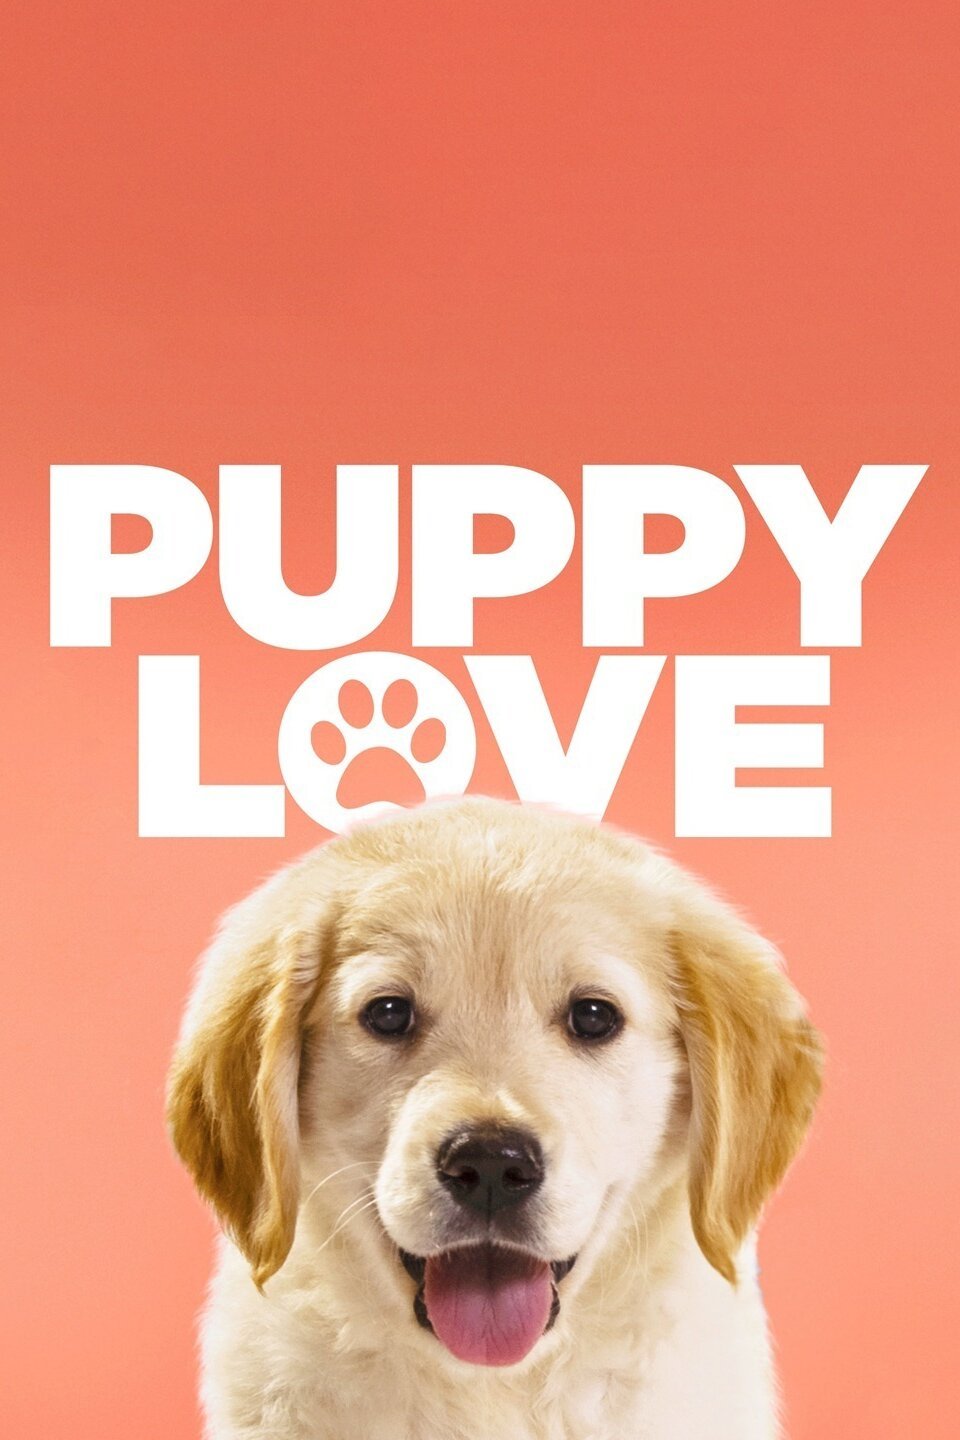 Puppy Love Rotten Tomatoes